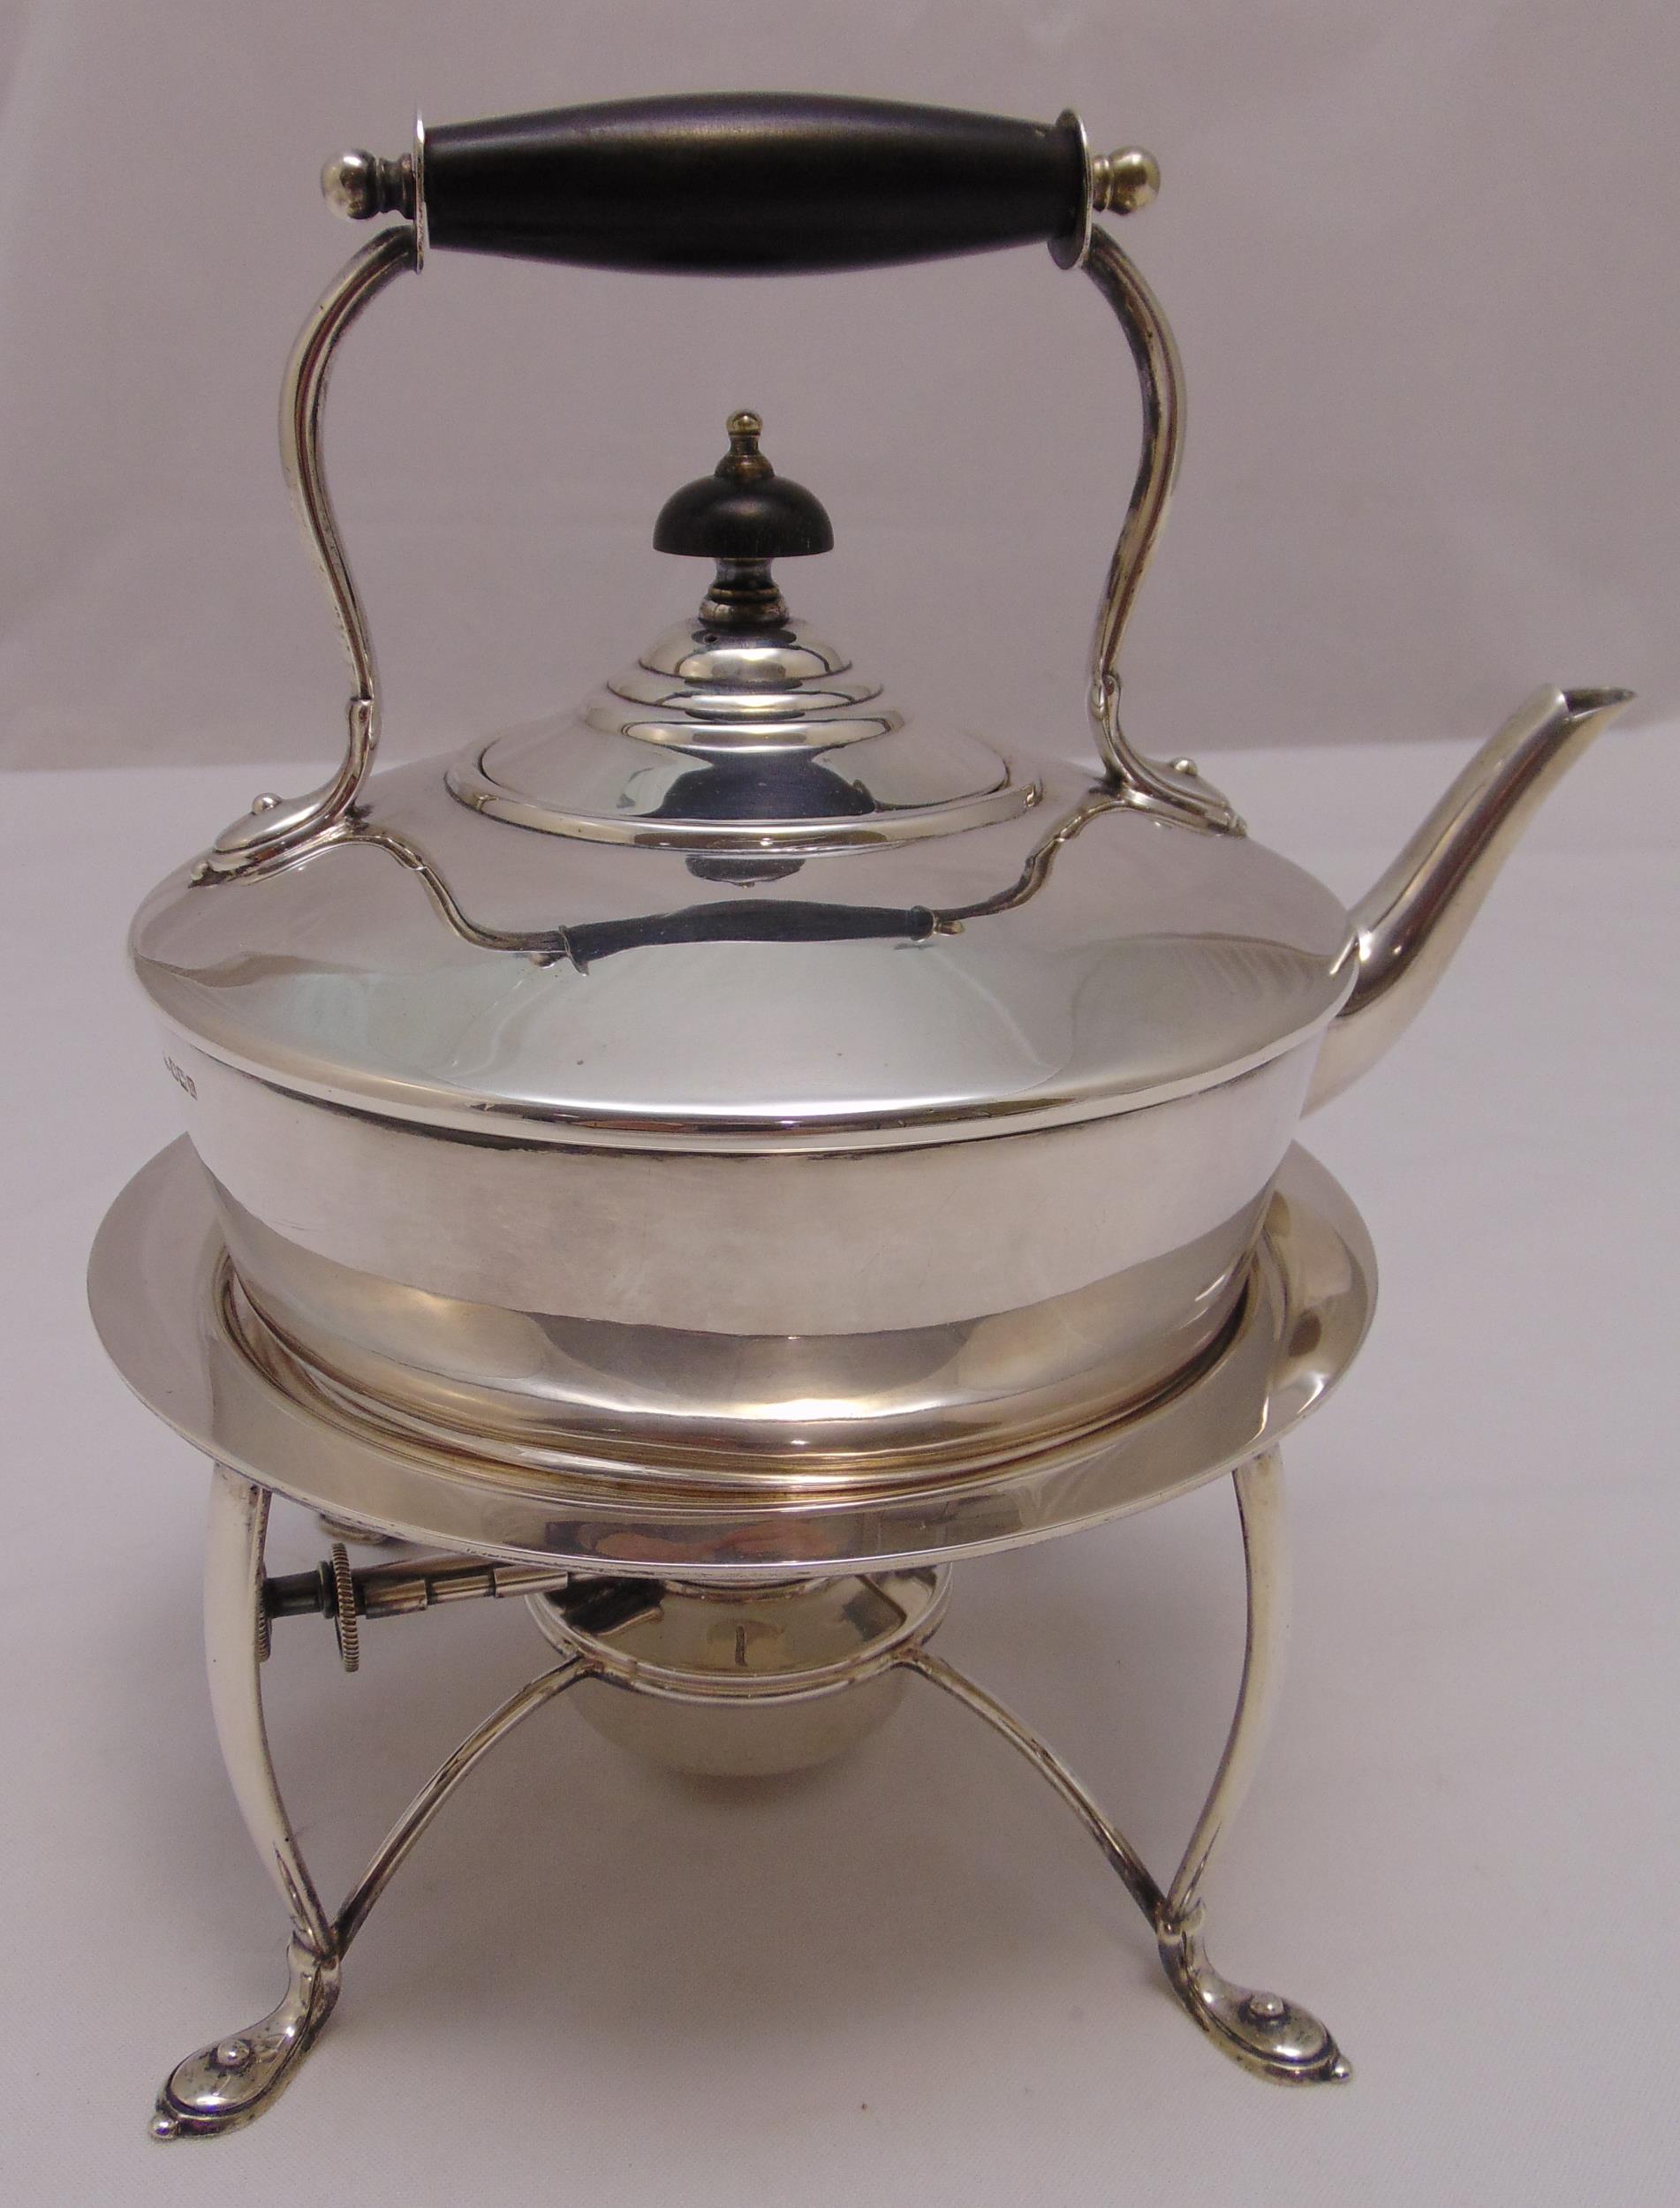 A Mappin and Webb hallmarked silver tea kettle on stand, of compressed cylindrical form with central